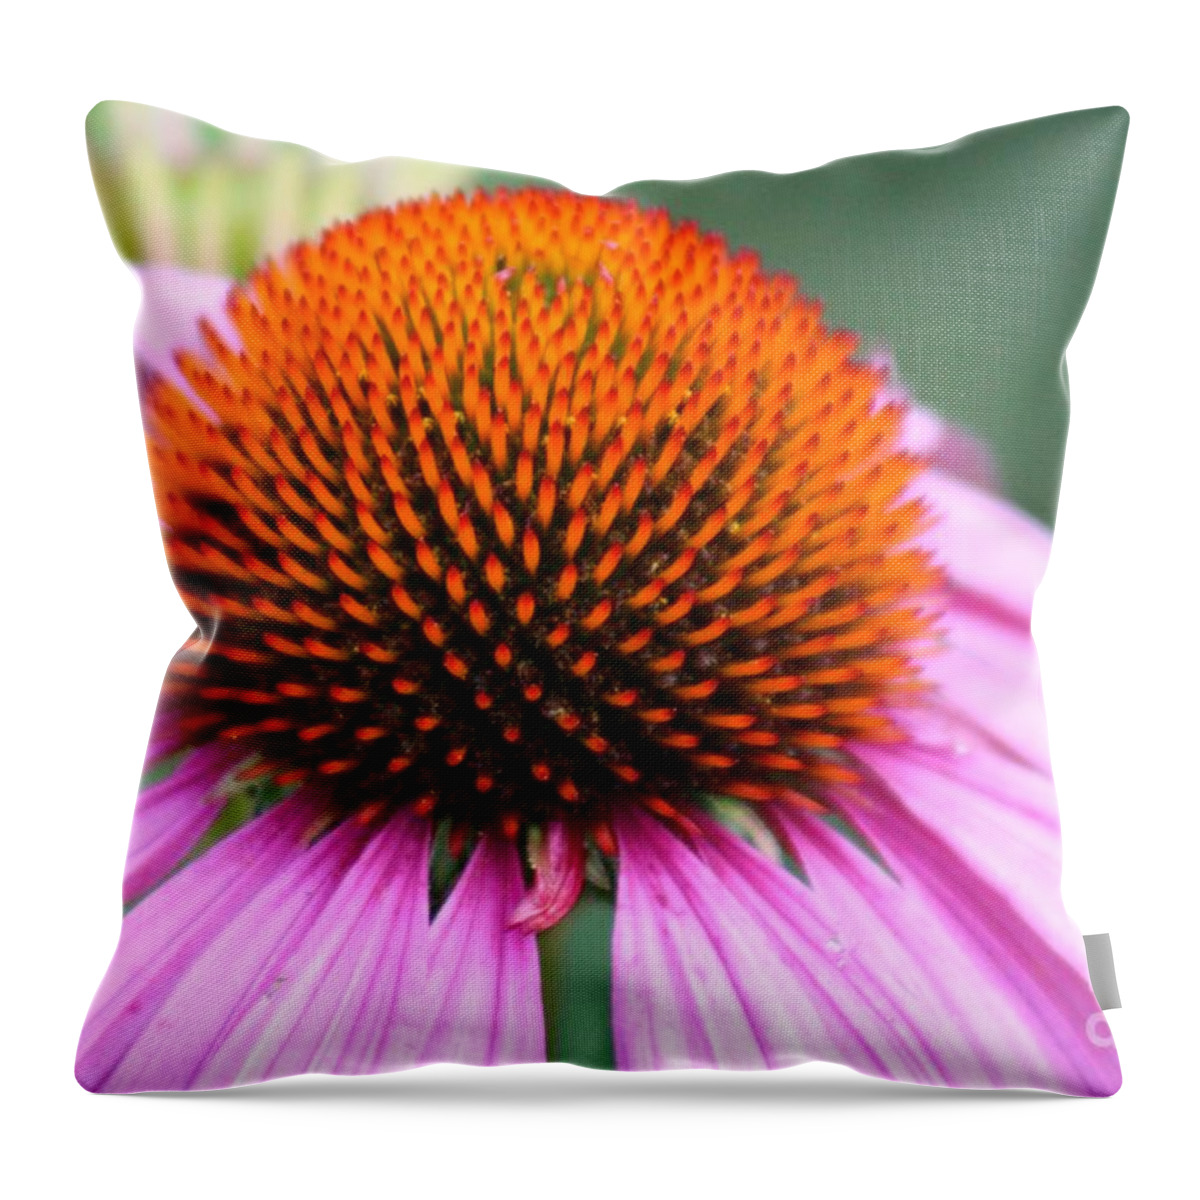 Pink Throw Pillow featuring the photograph Nature's Beauty 74 by Deena Withycombe